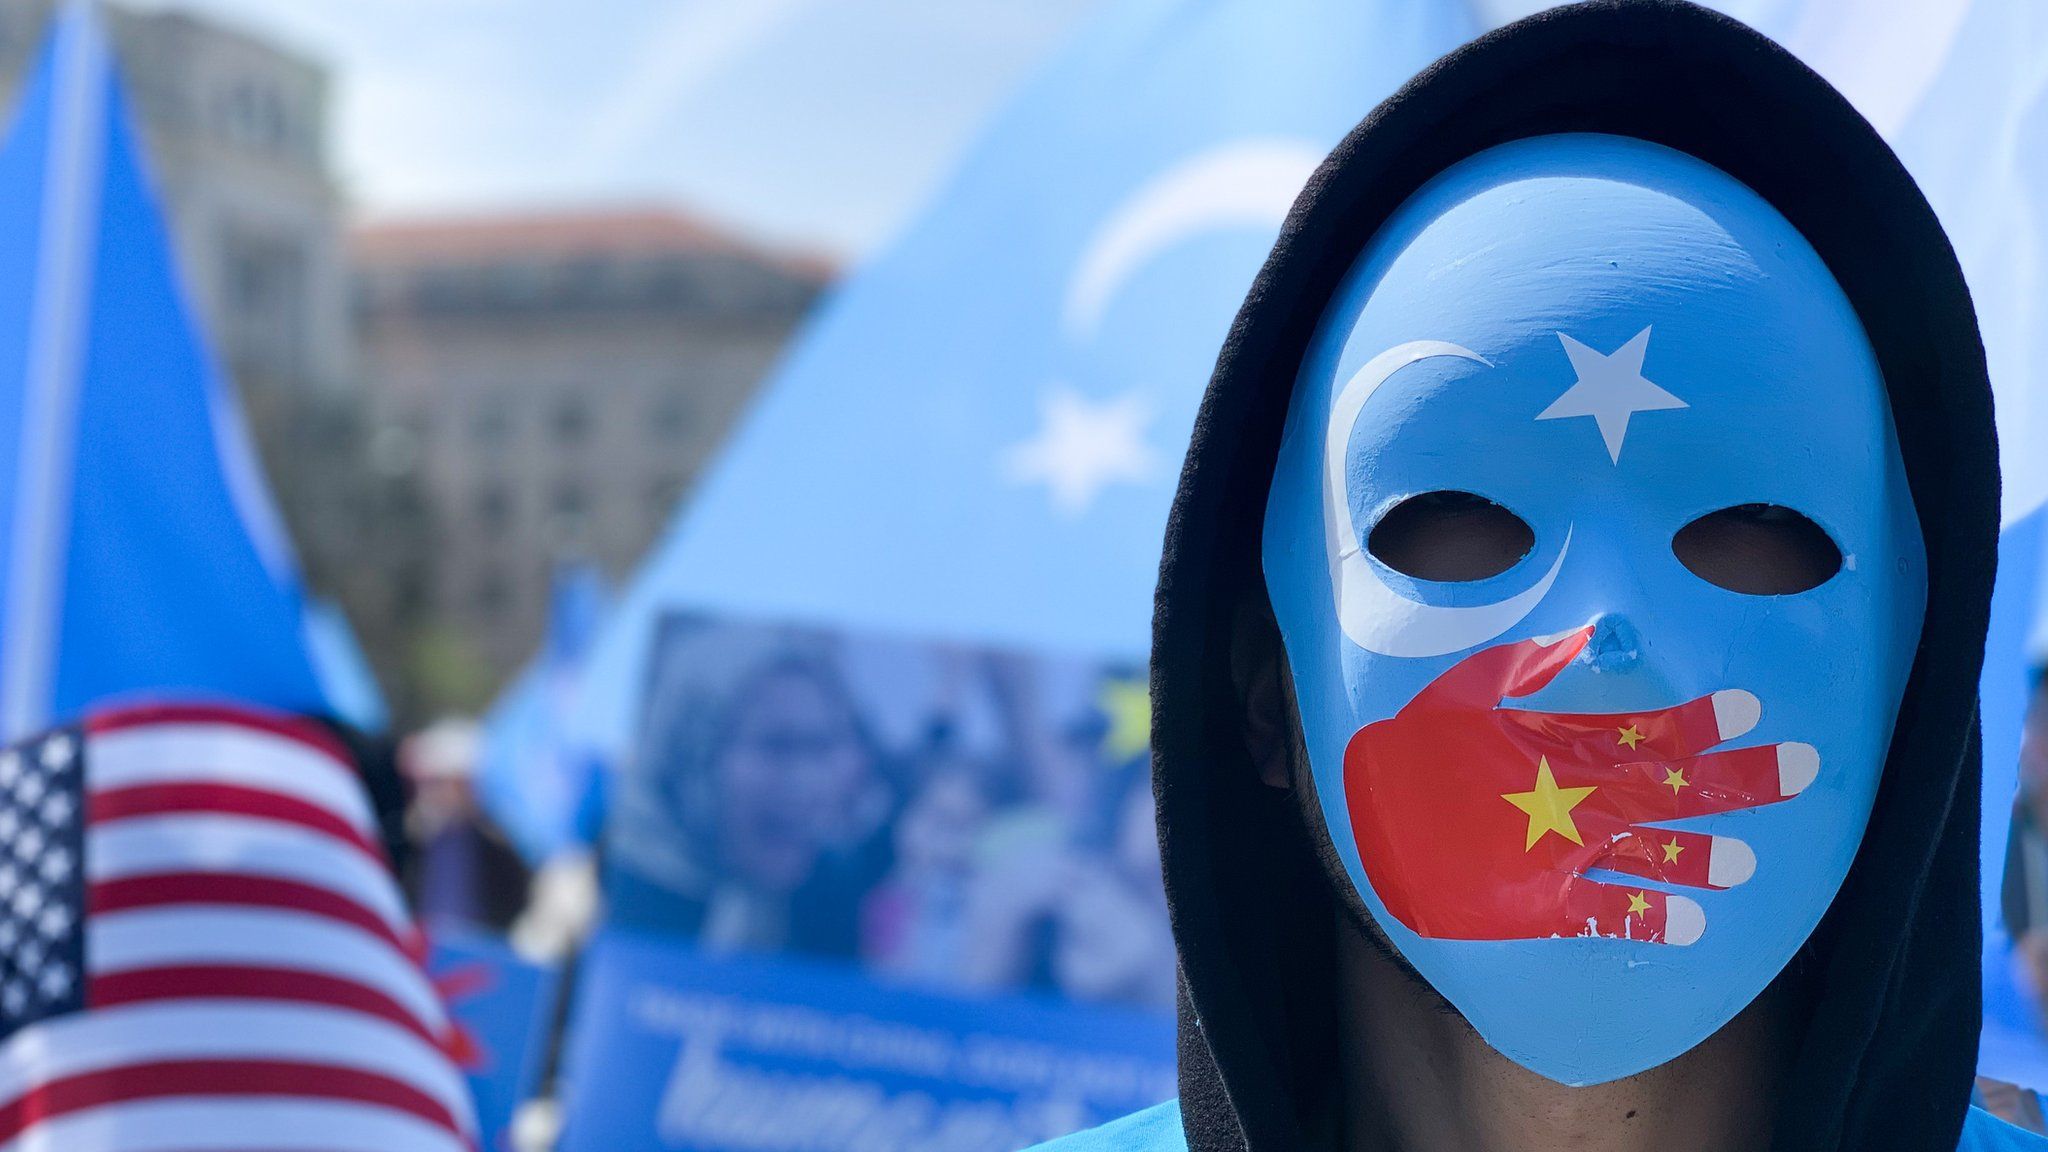 A demonstrator, wearing a mask with a Chinese flag on a hand over the mouth, protests in Washington